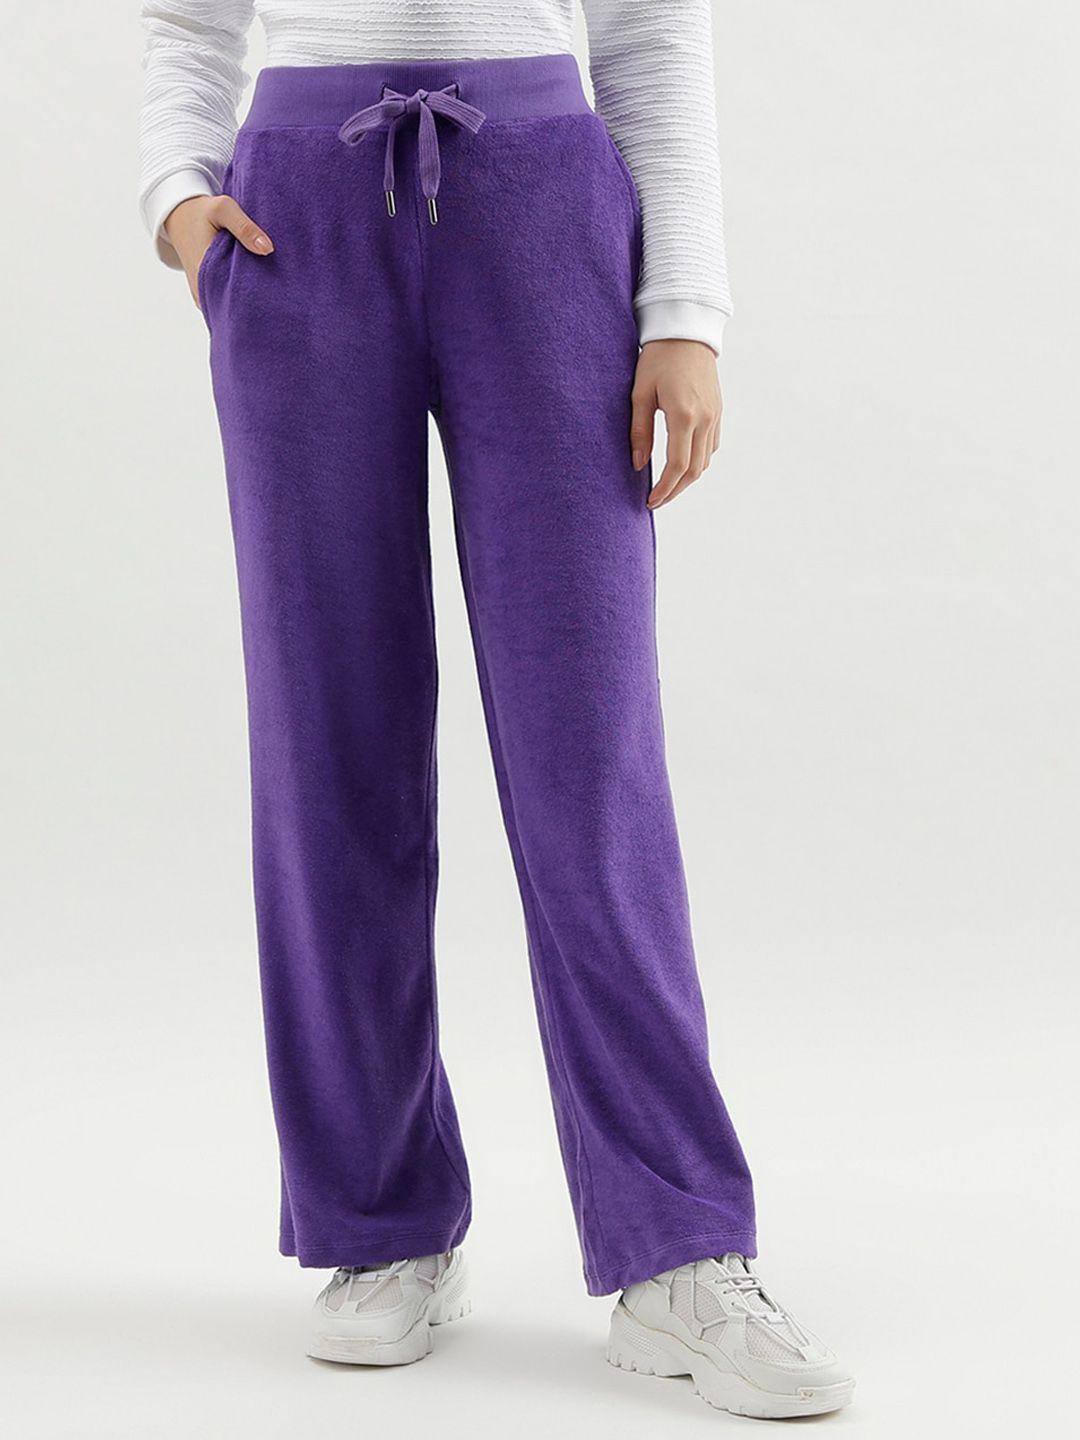 united colors of benetton women mid rise flared cotton parallel trousers